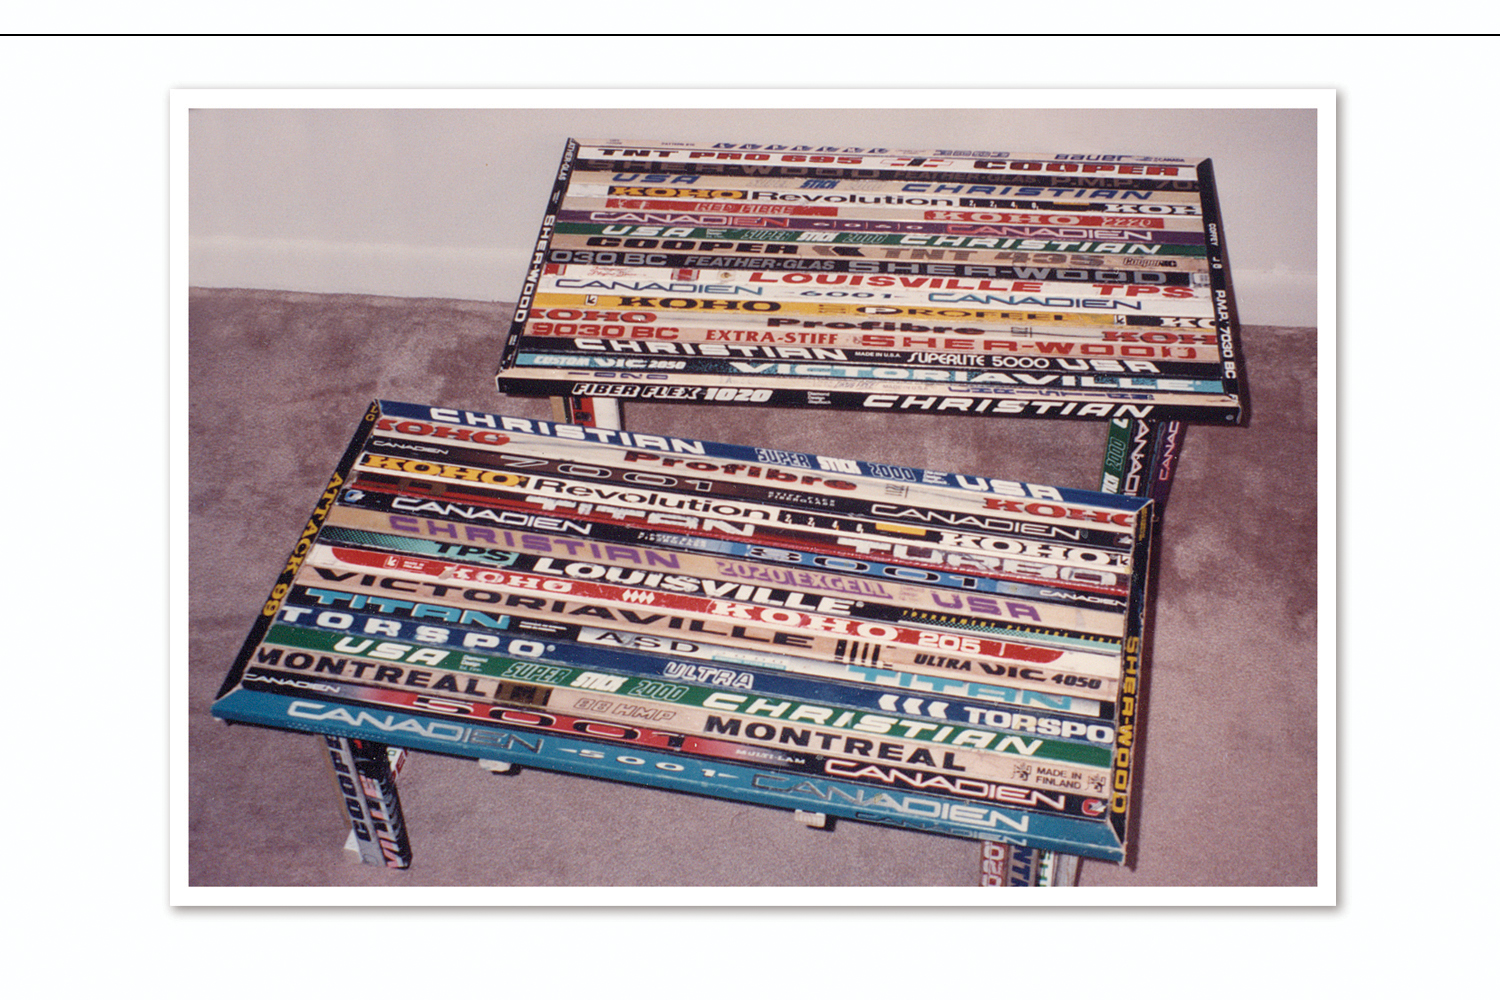   Hockey Tables from Recycled Sticks,   On display at the Alan Bortman Design Group  